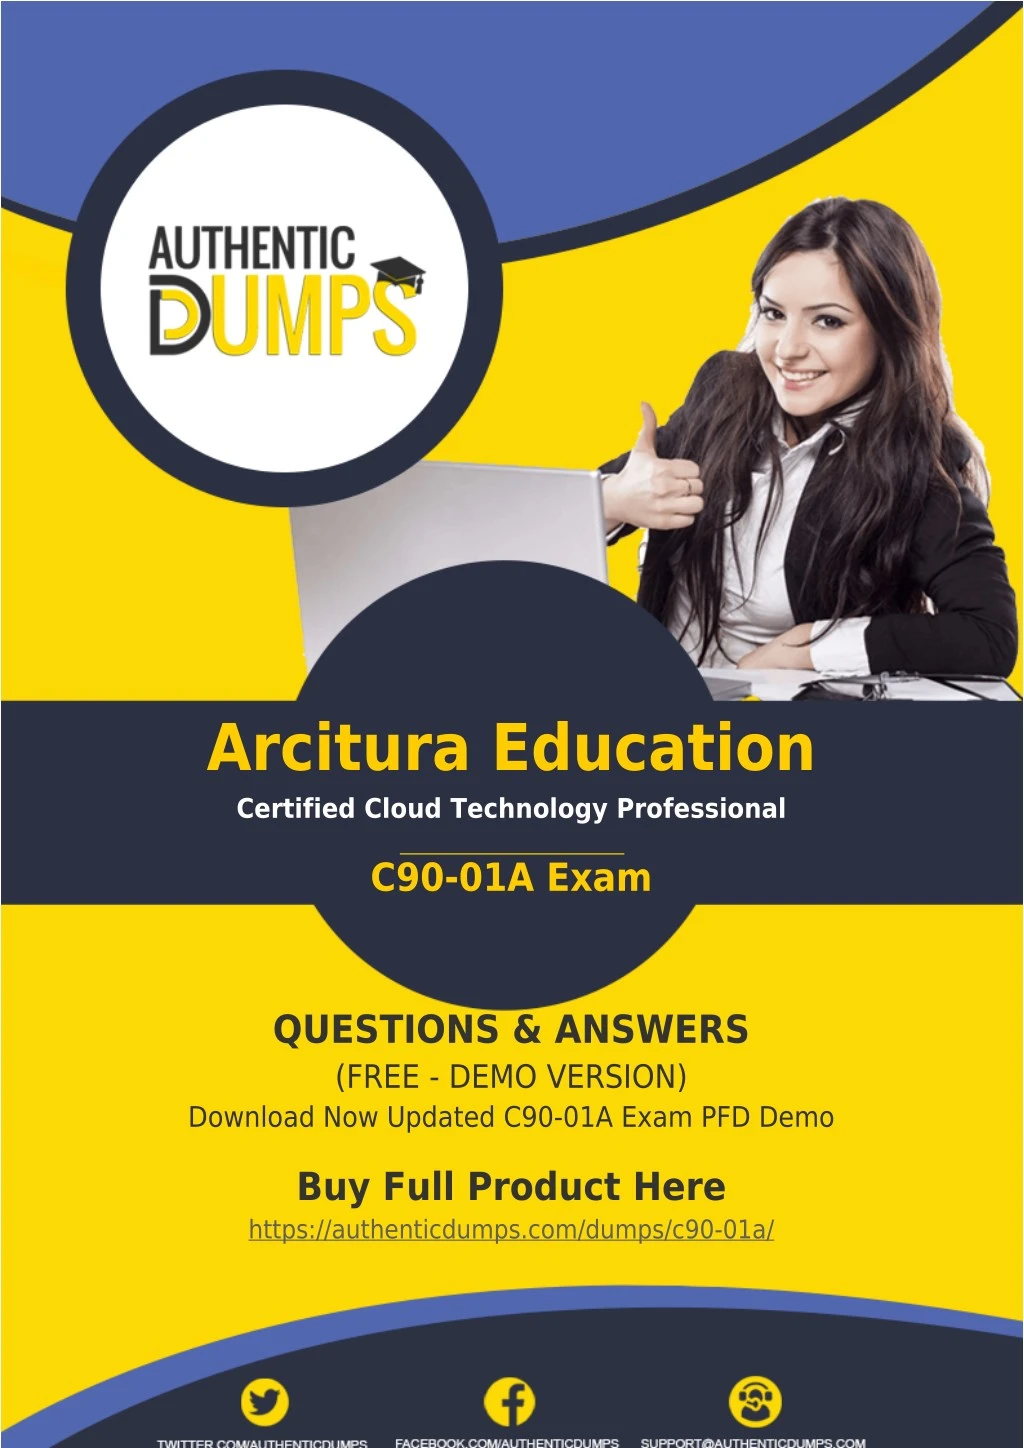 arcitura education certified cloud technology